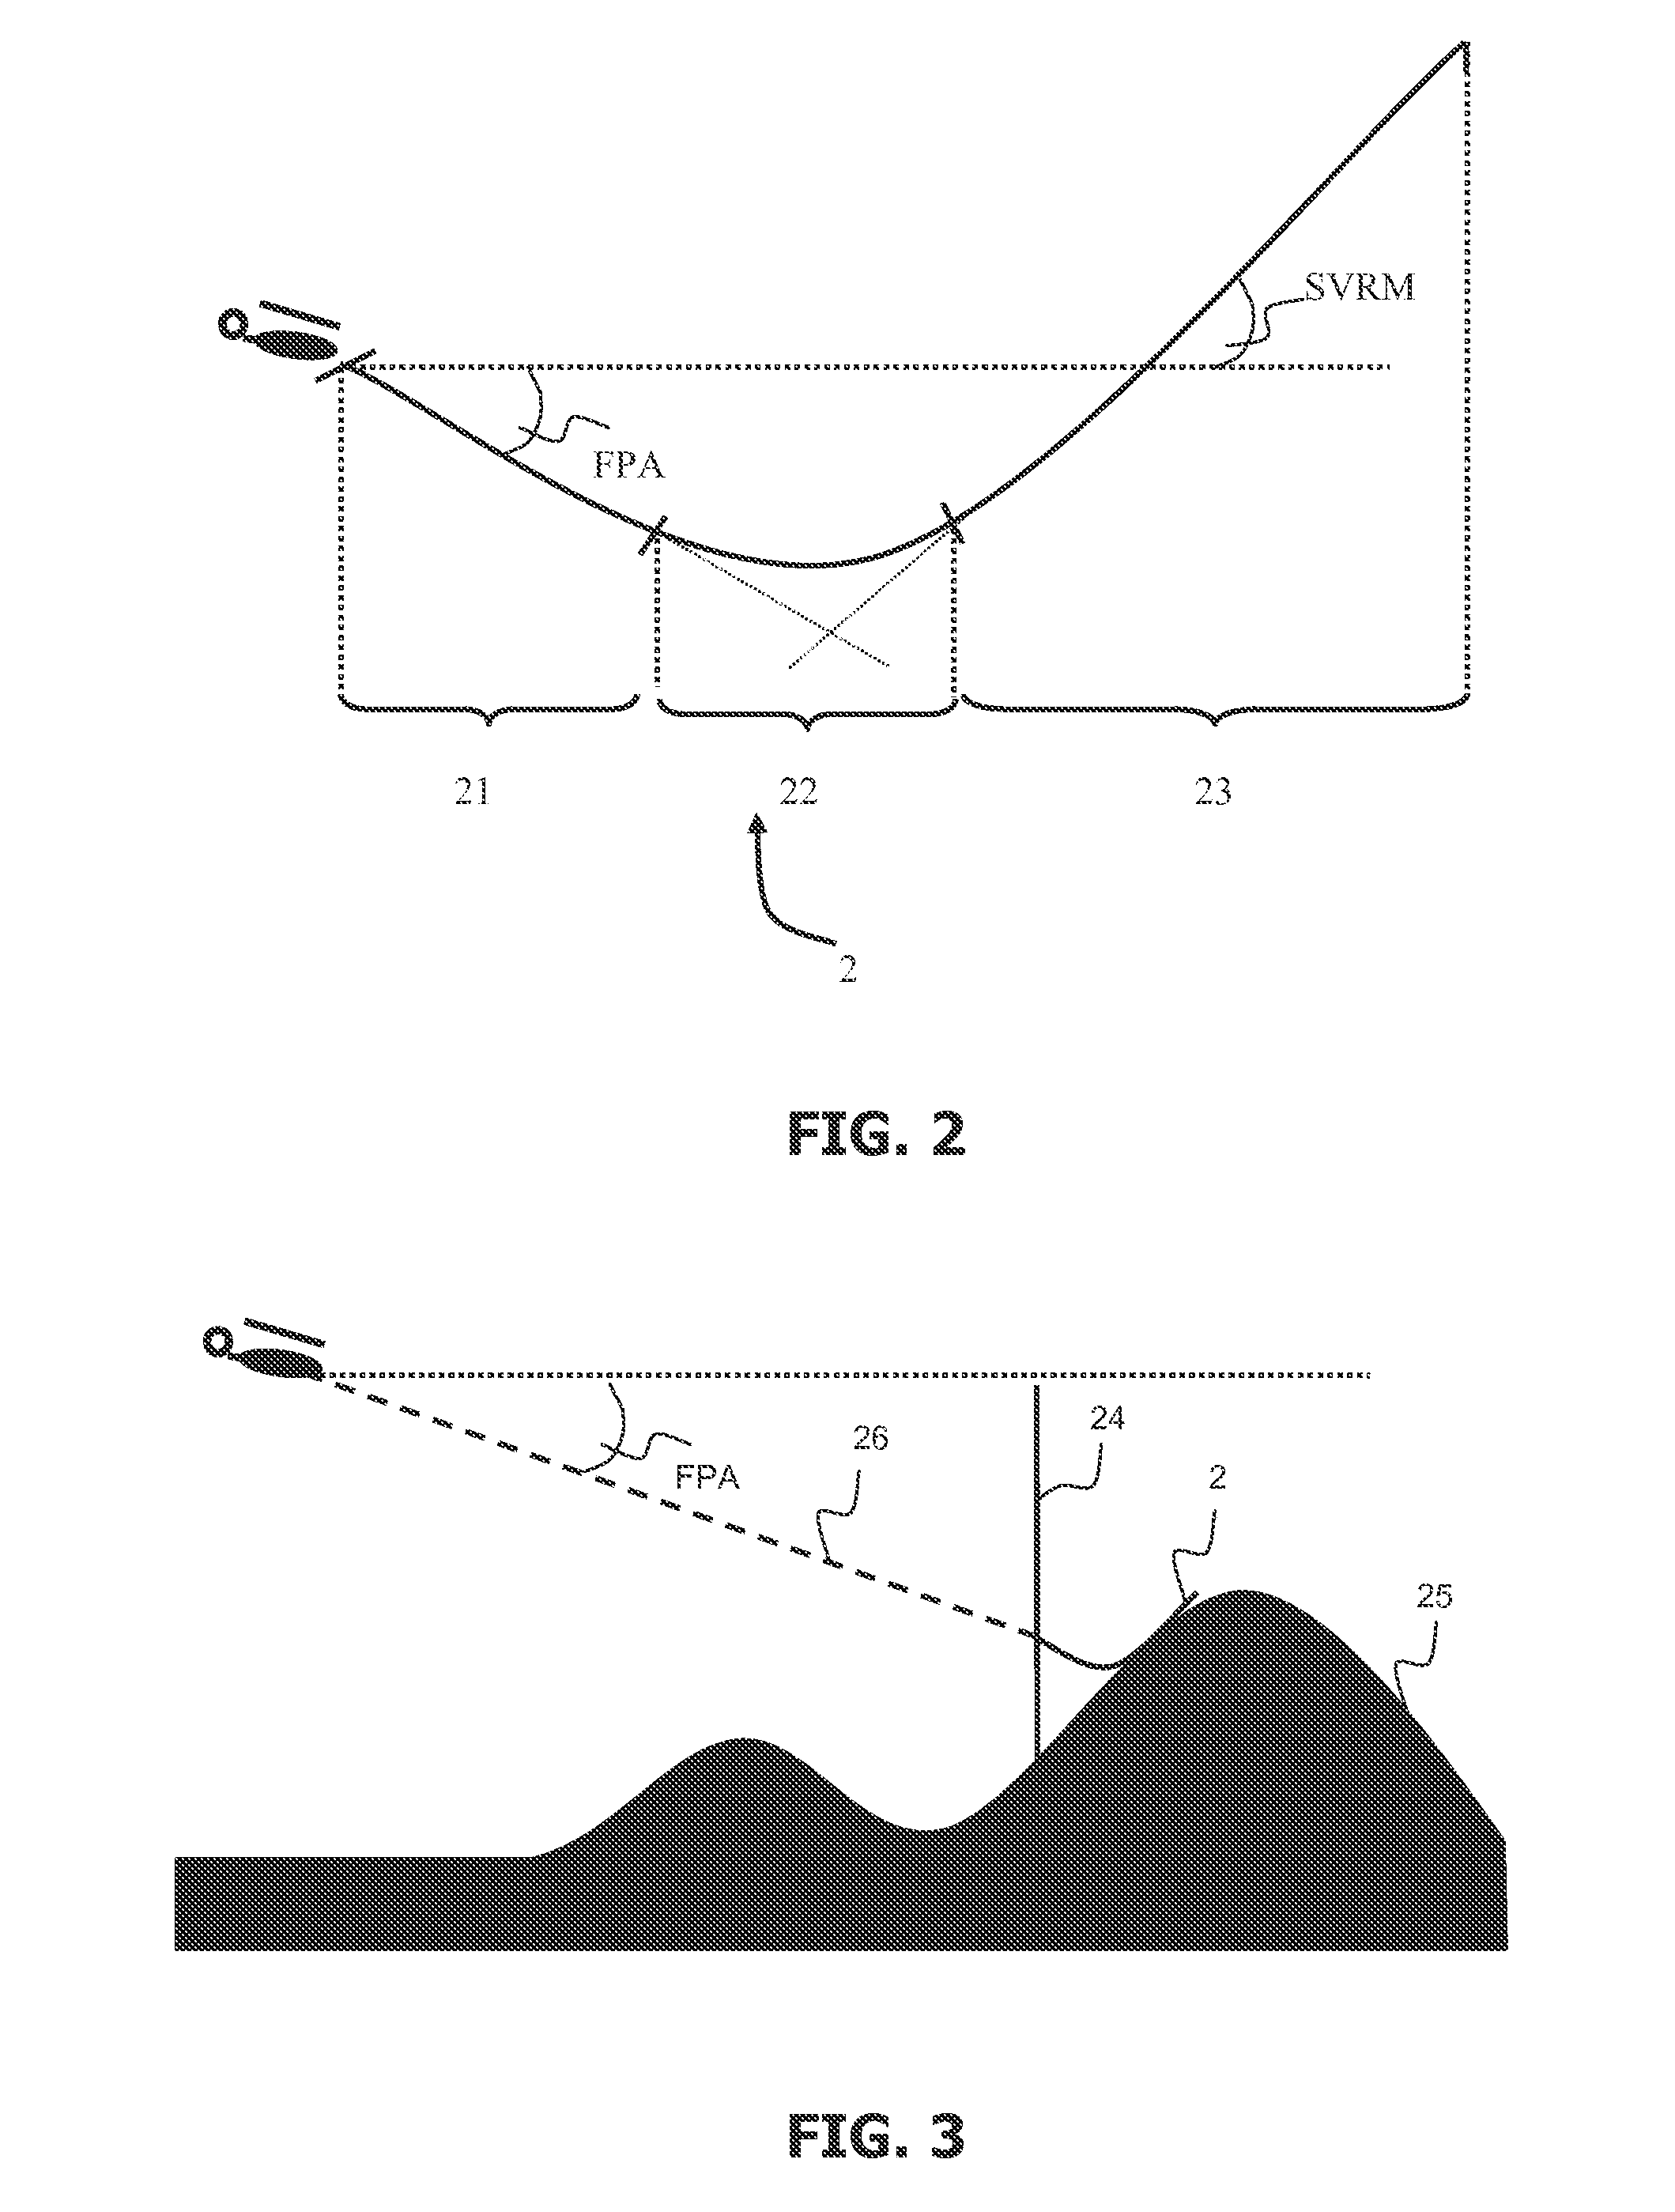 Method and Device for Displaying the Limits of Flight Margins for an Aircraft